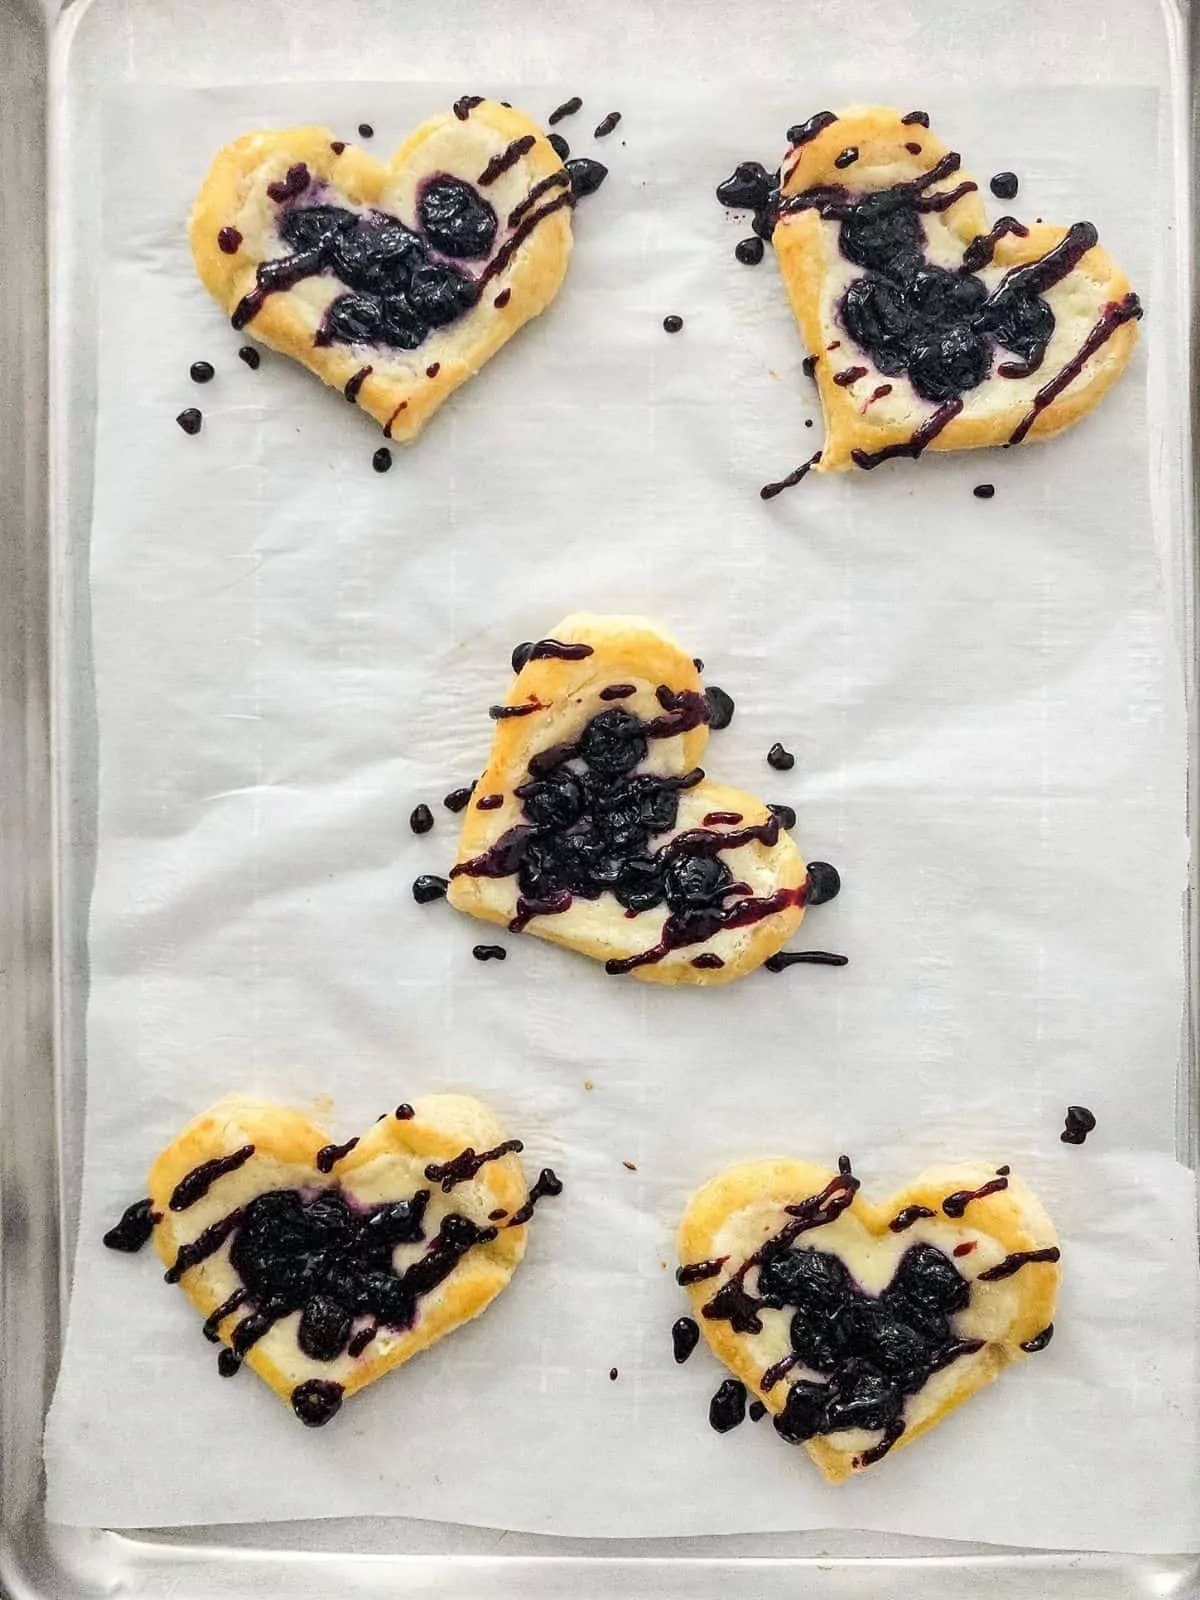 Baked puff pastry danish with blueberries on parchment paper lined tray.